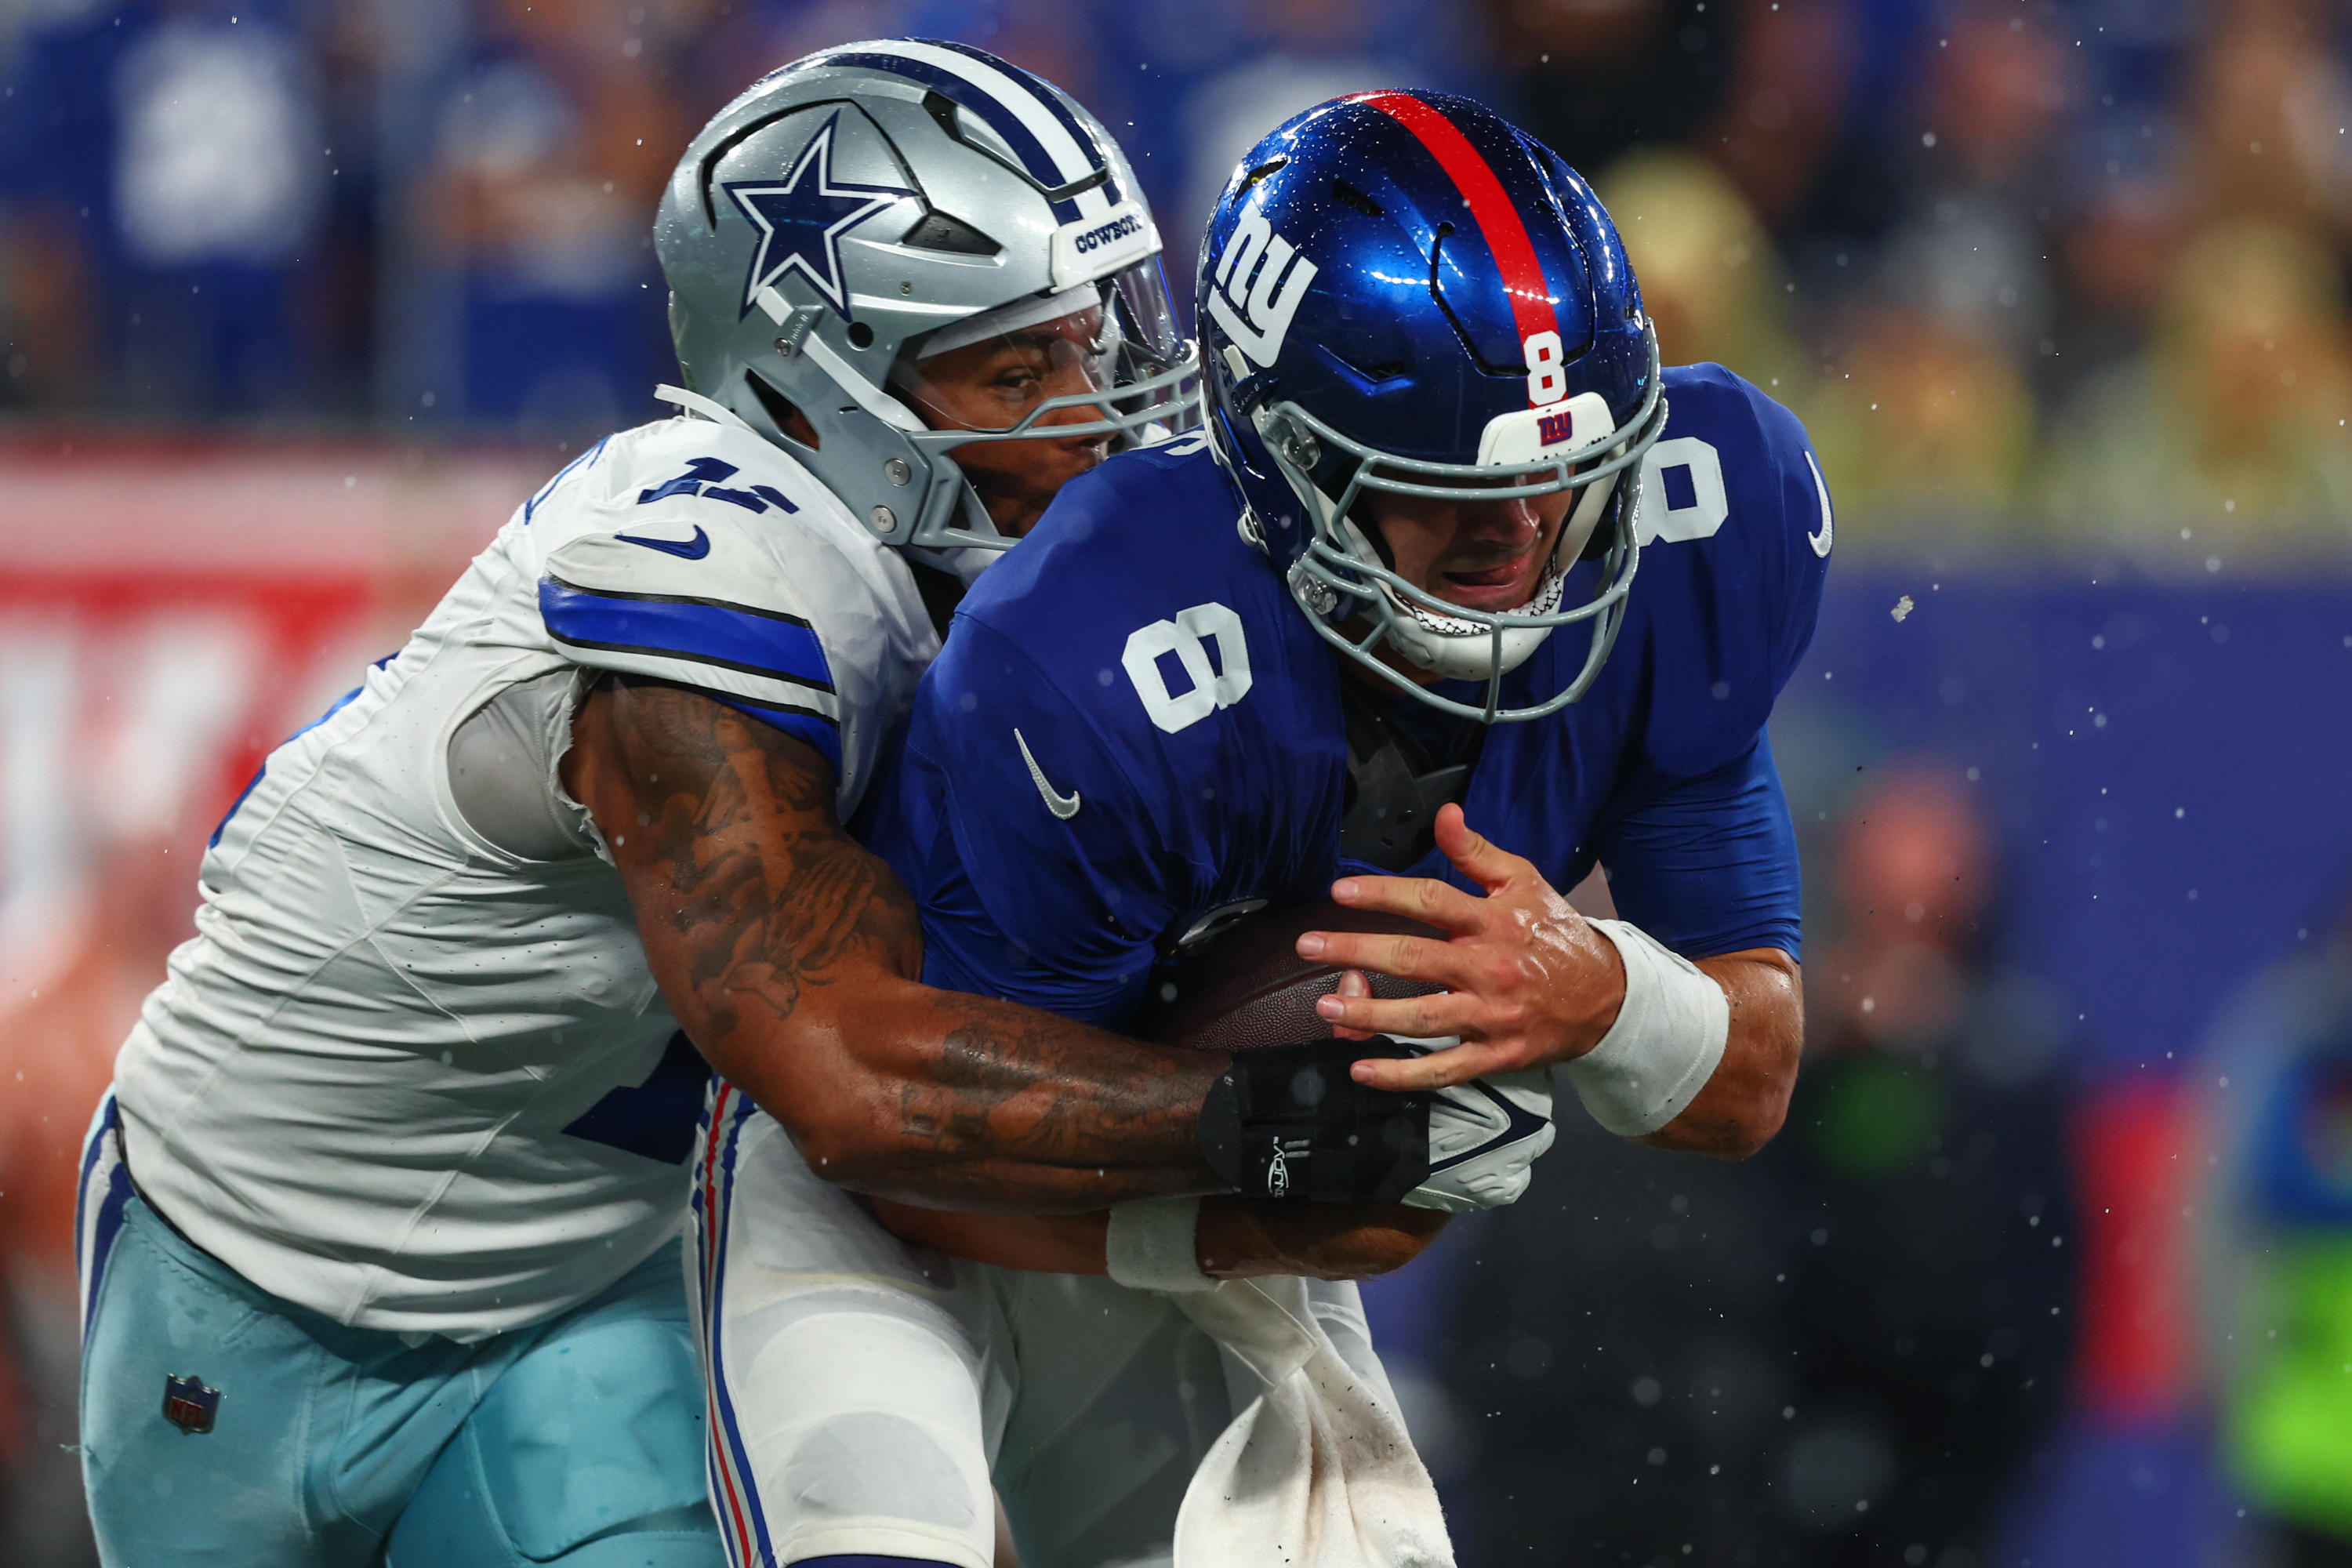 Cowboys-Giants live updates: Dallas completes shutout, dominant performance  in opener